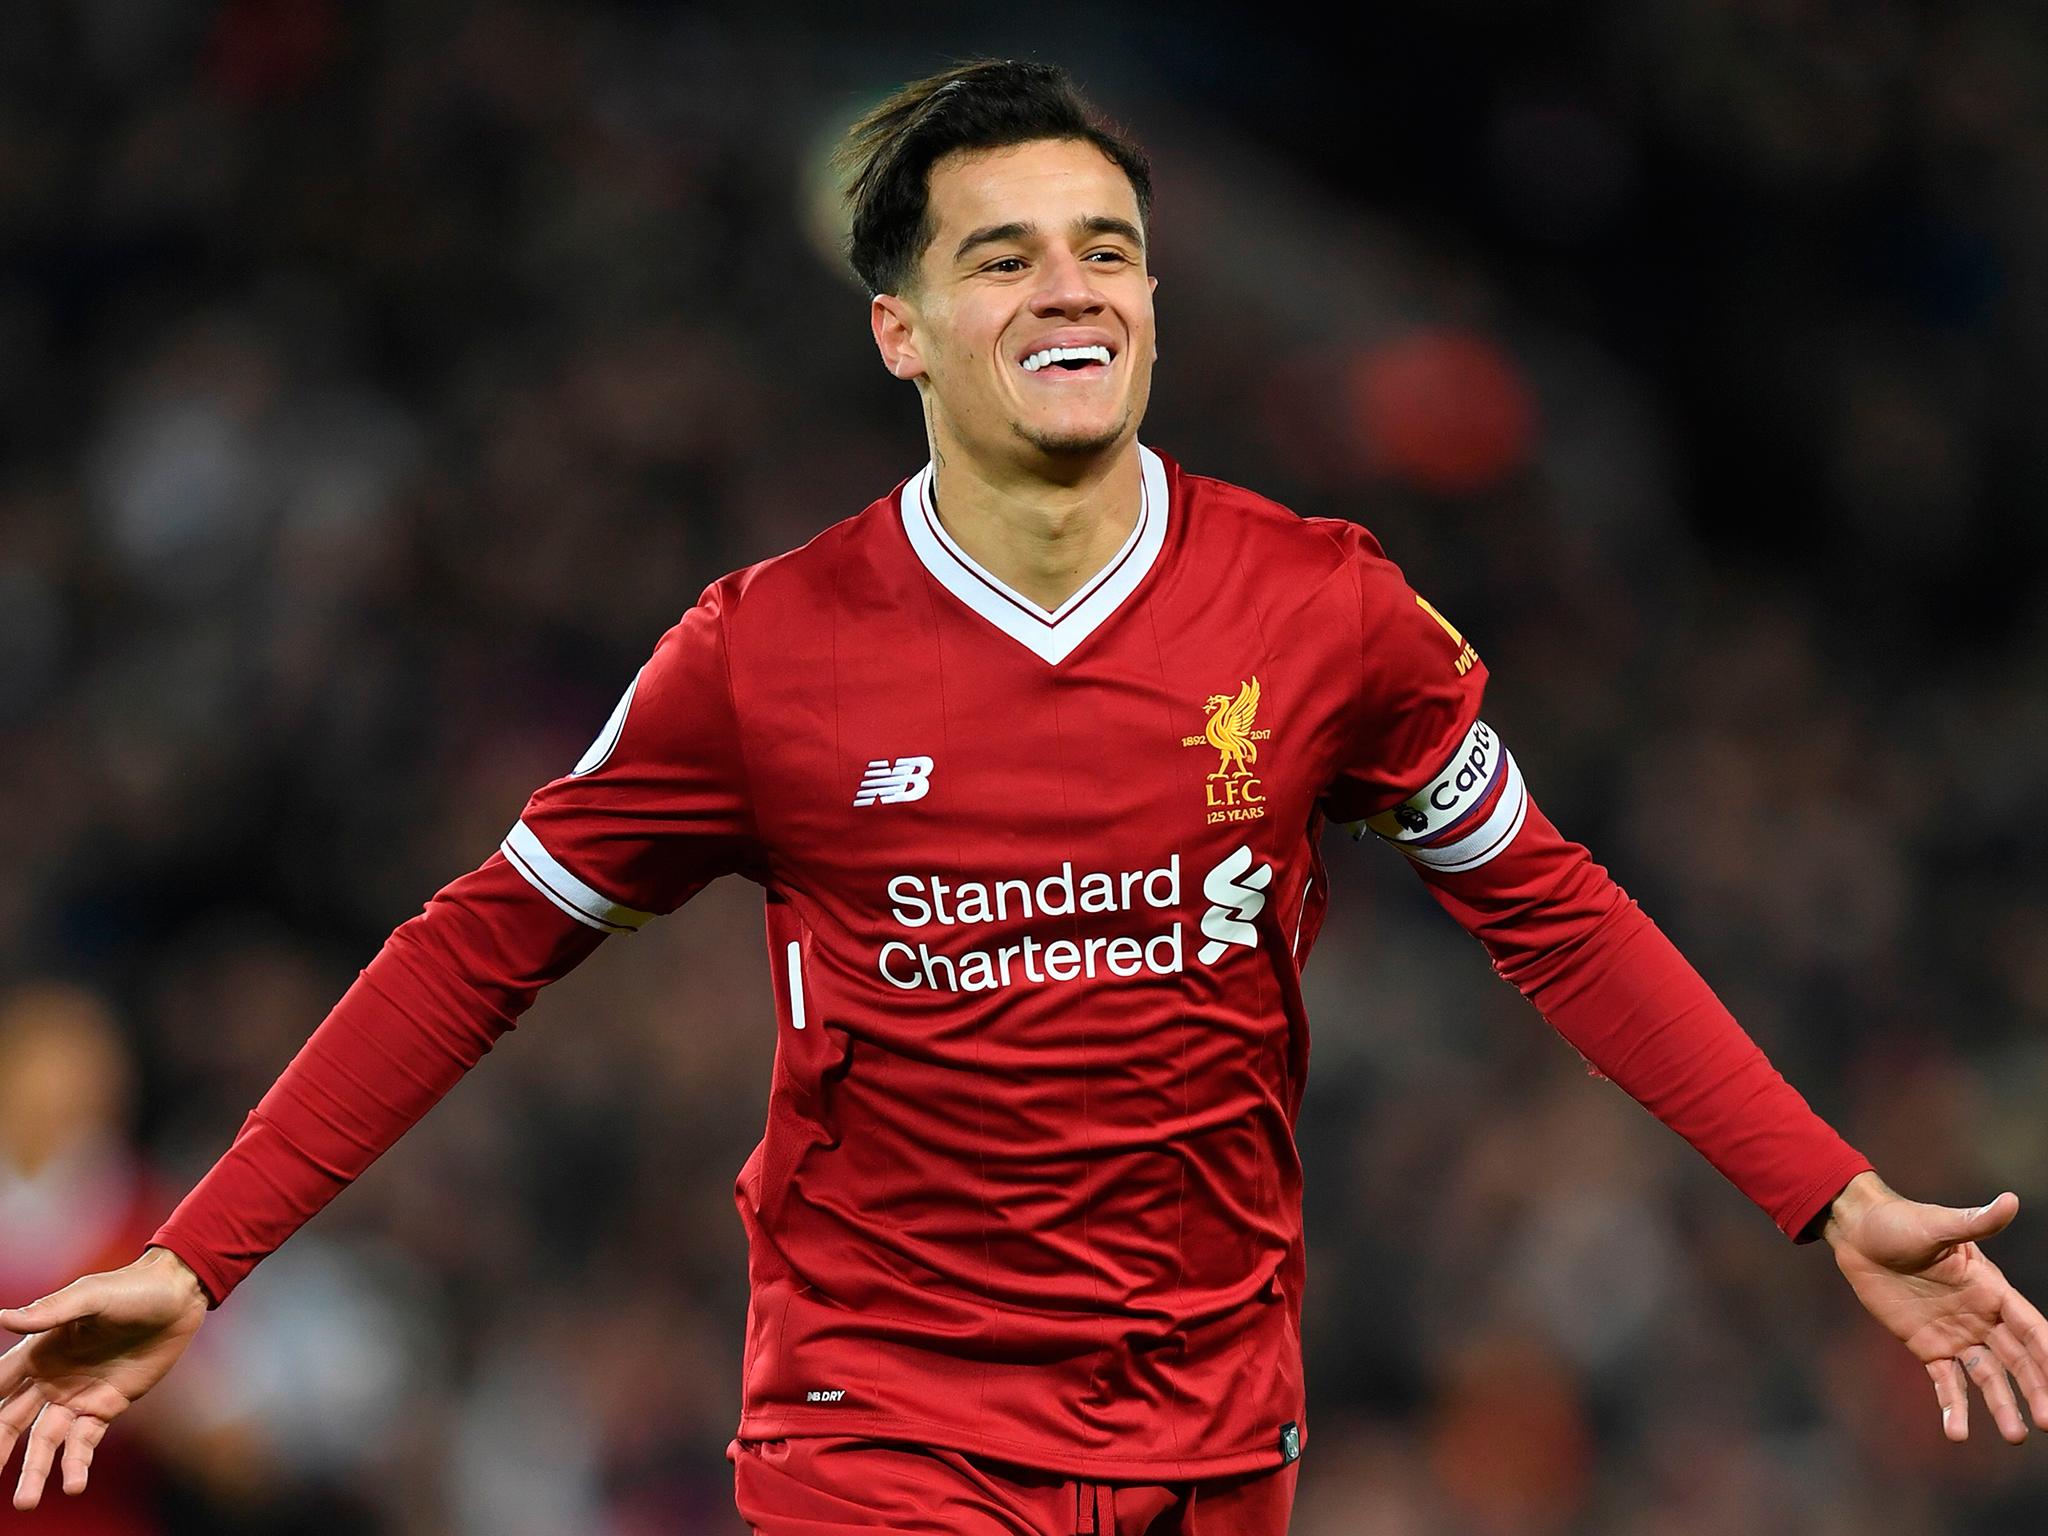 Coutinho has been linked with a move to Barcelona